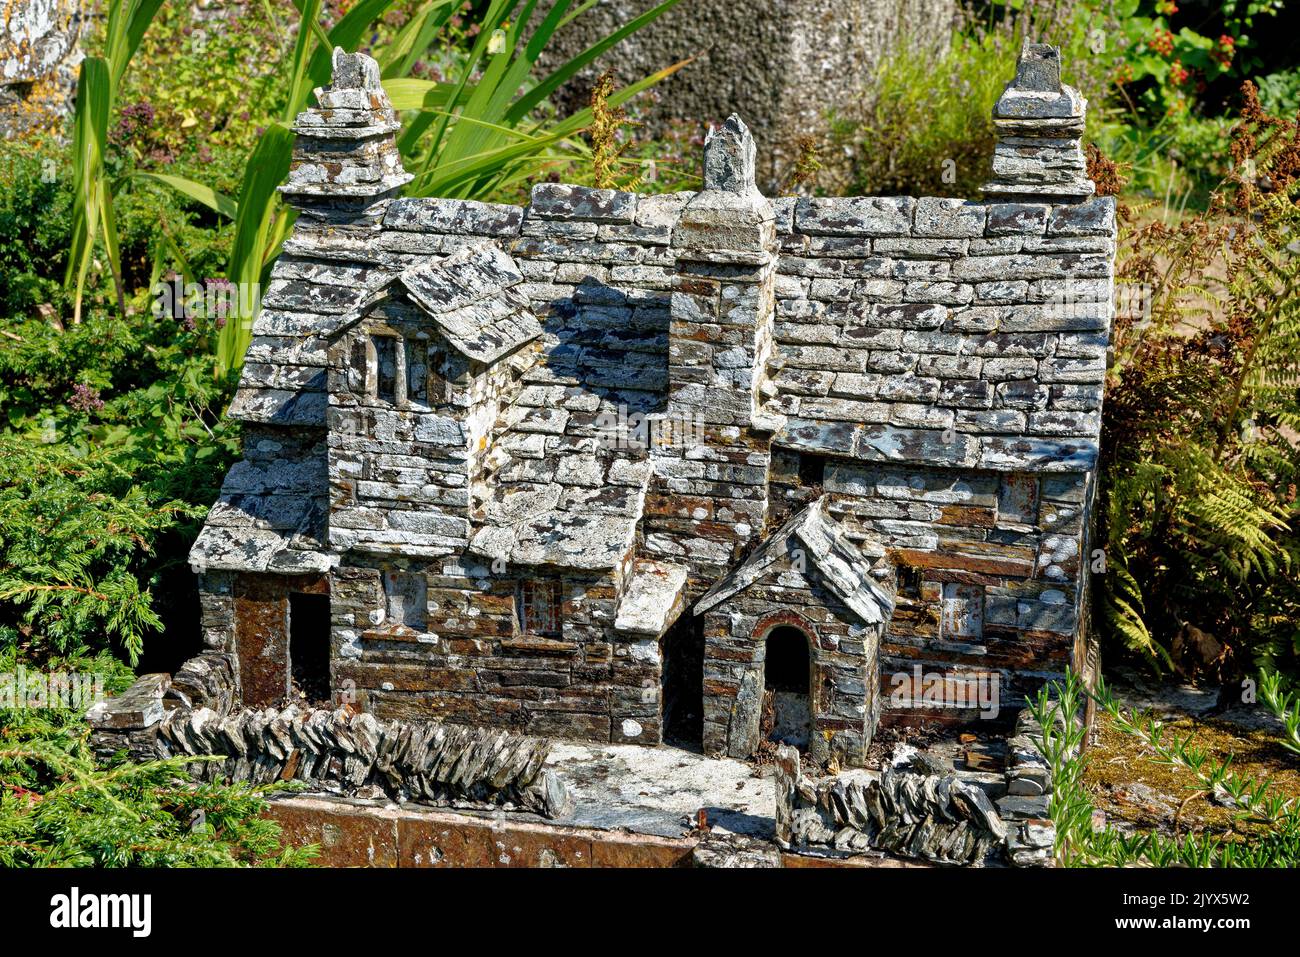 United Kingdom, South West England, Cornwall, Tintagel - The medieval hall-house of 14th century - The Old Post Office. 12th of August, 2022 Stock Photo